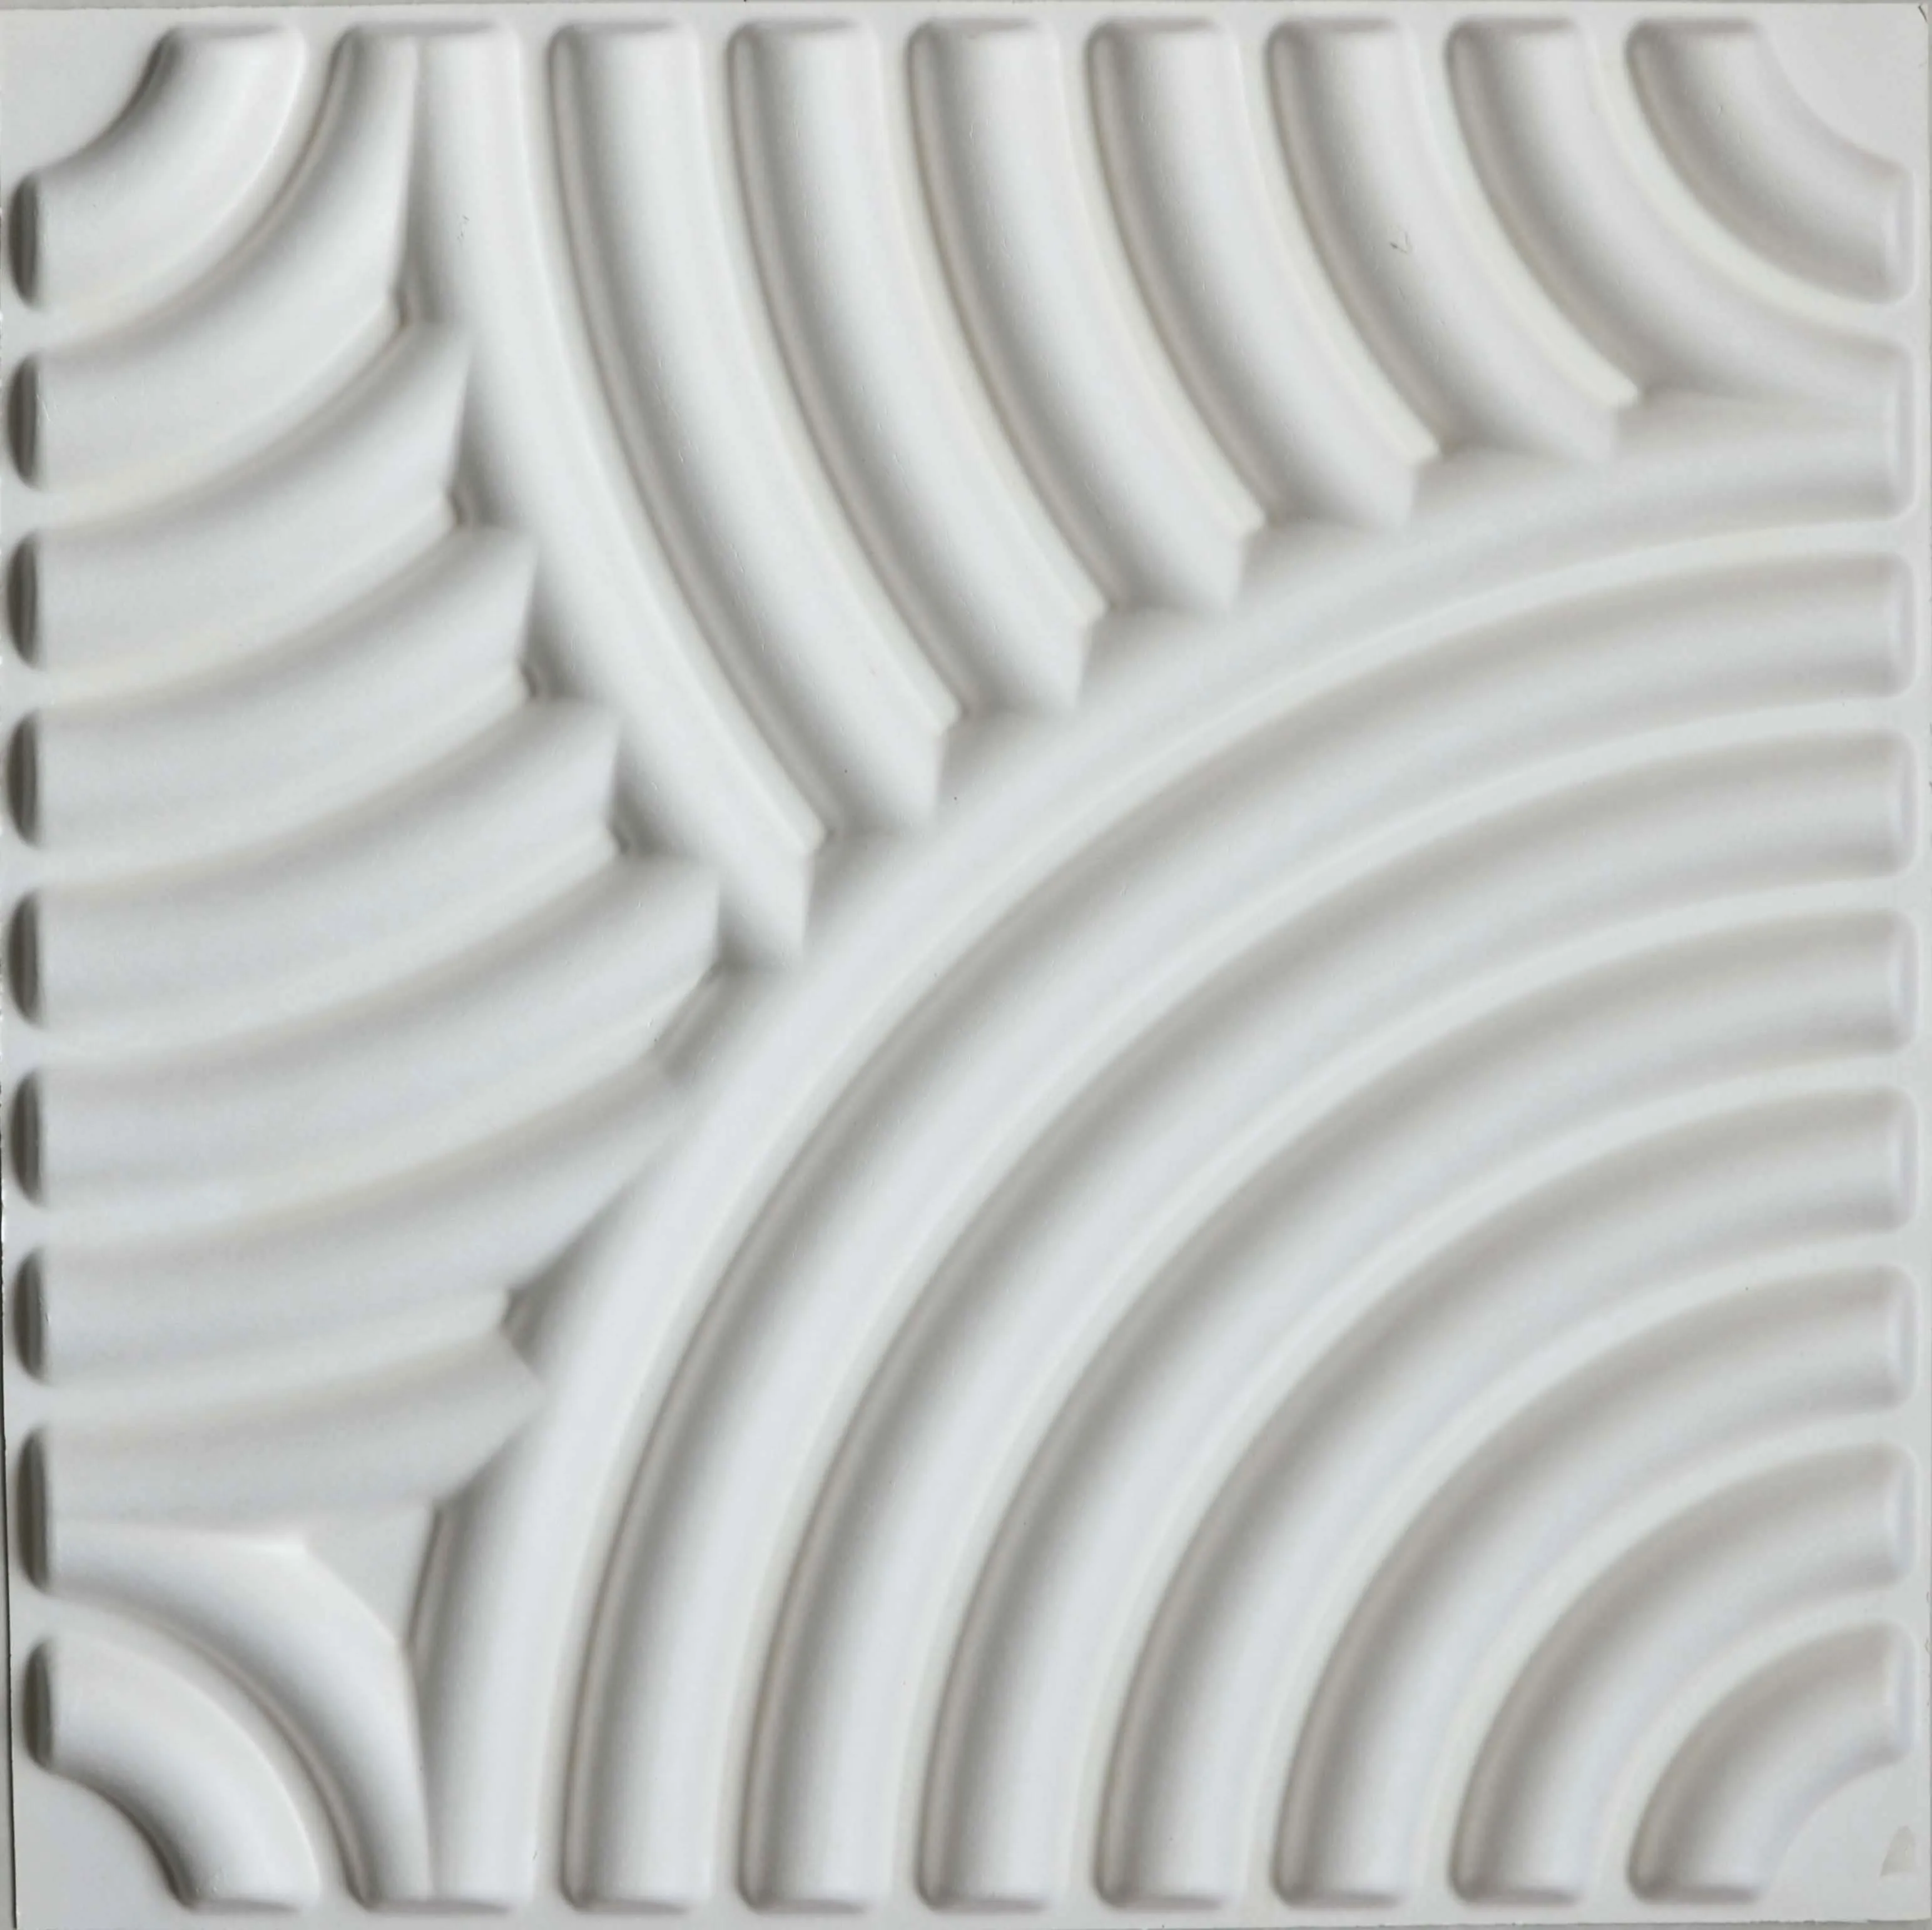 Homes Decorating Ideas 3d Wall Panel And 3d Wall Covering For Eco Friendly Wall Decoration Buy High Quality 3d Wall Panel 3d Wall Cecoration Decorative Embossed Wall Panels Product On Alibaba Com